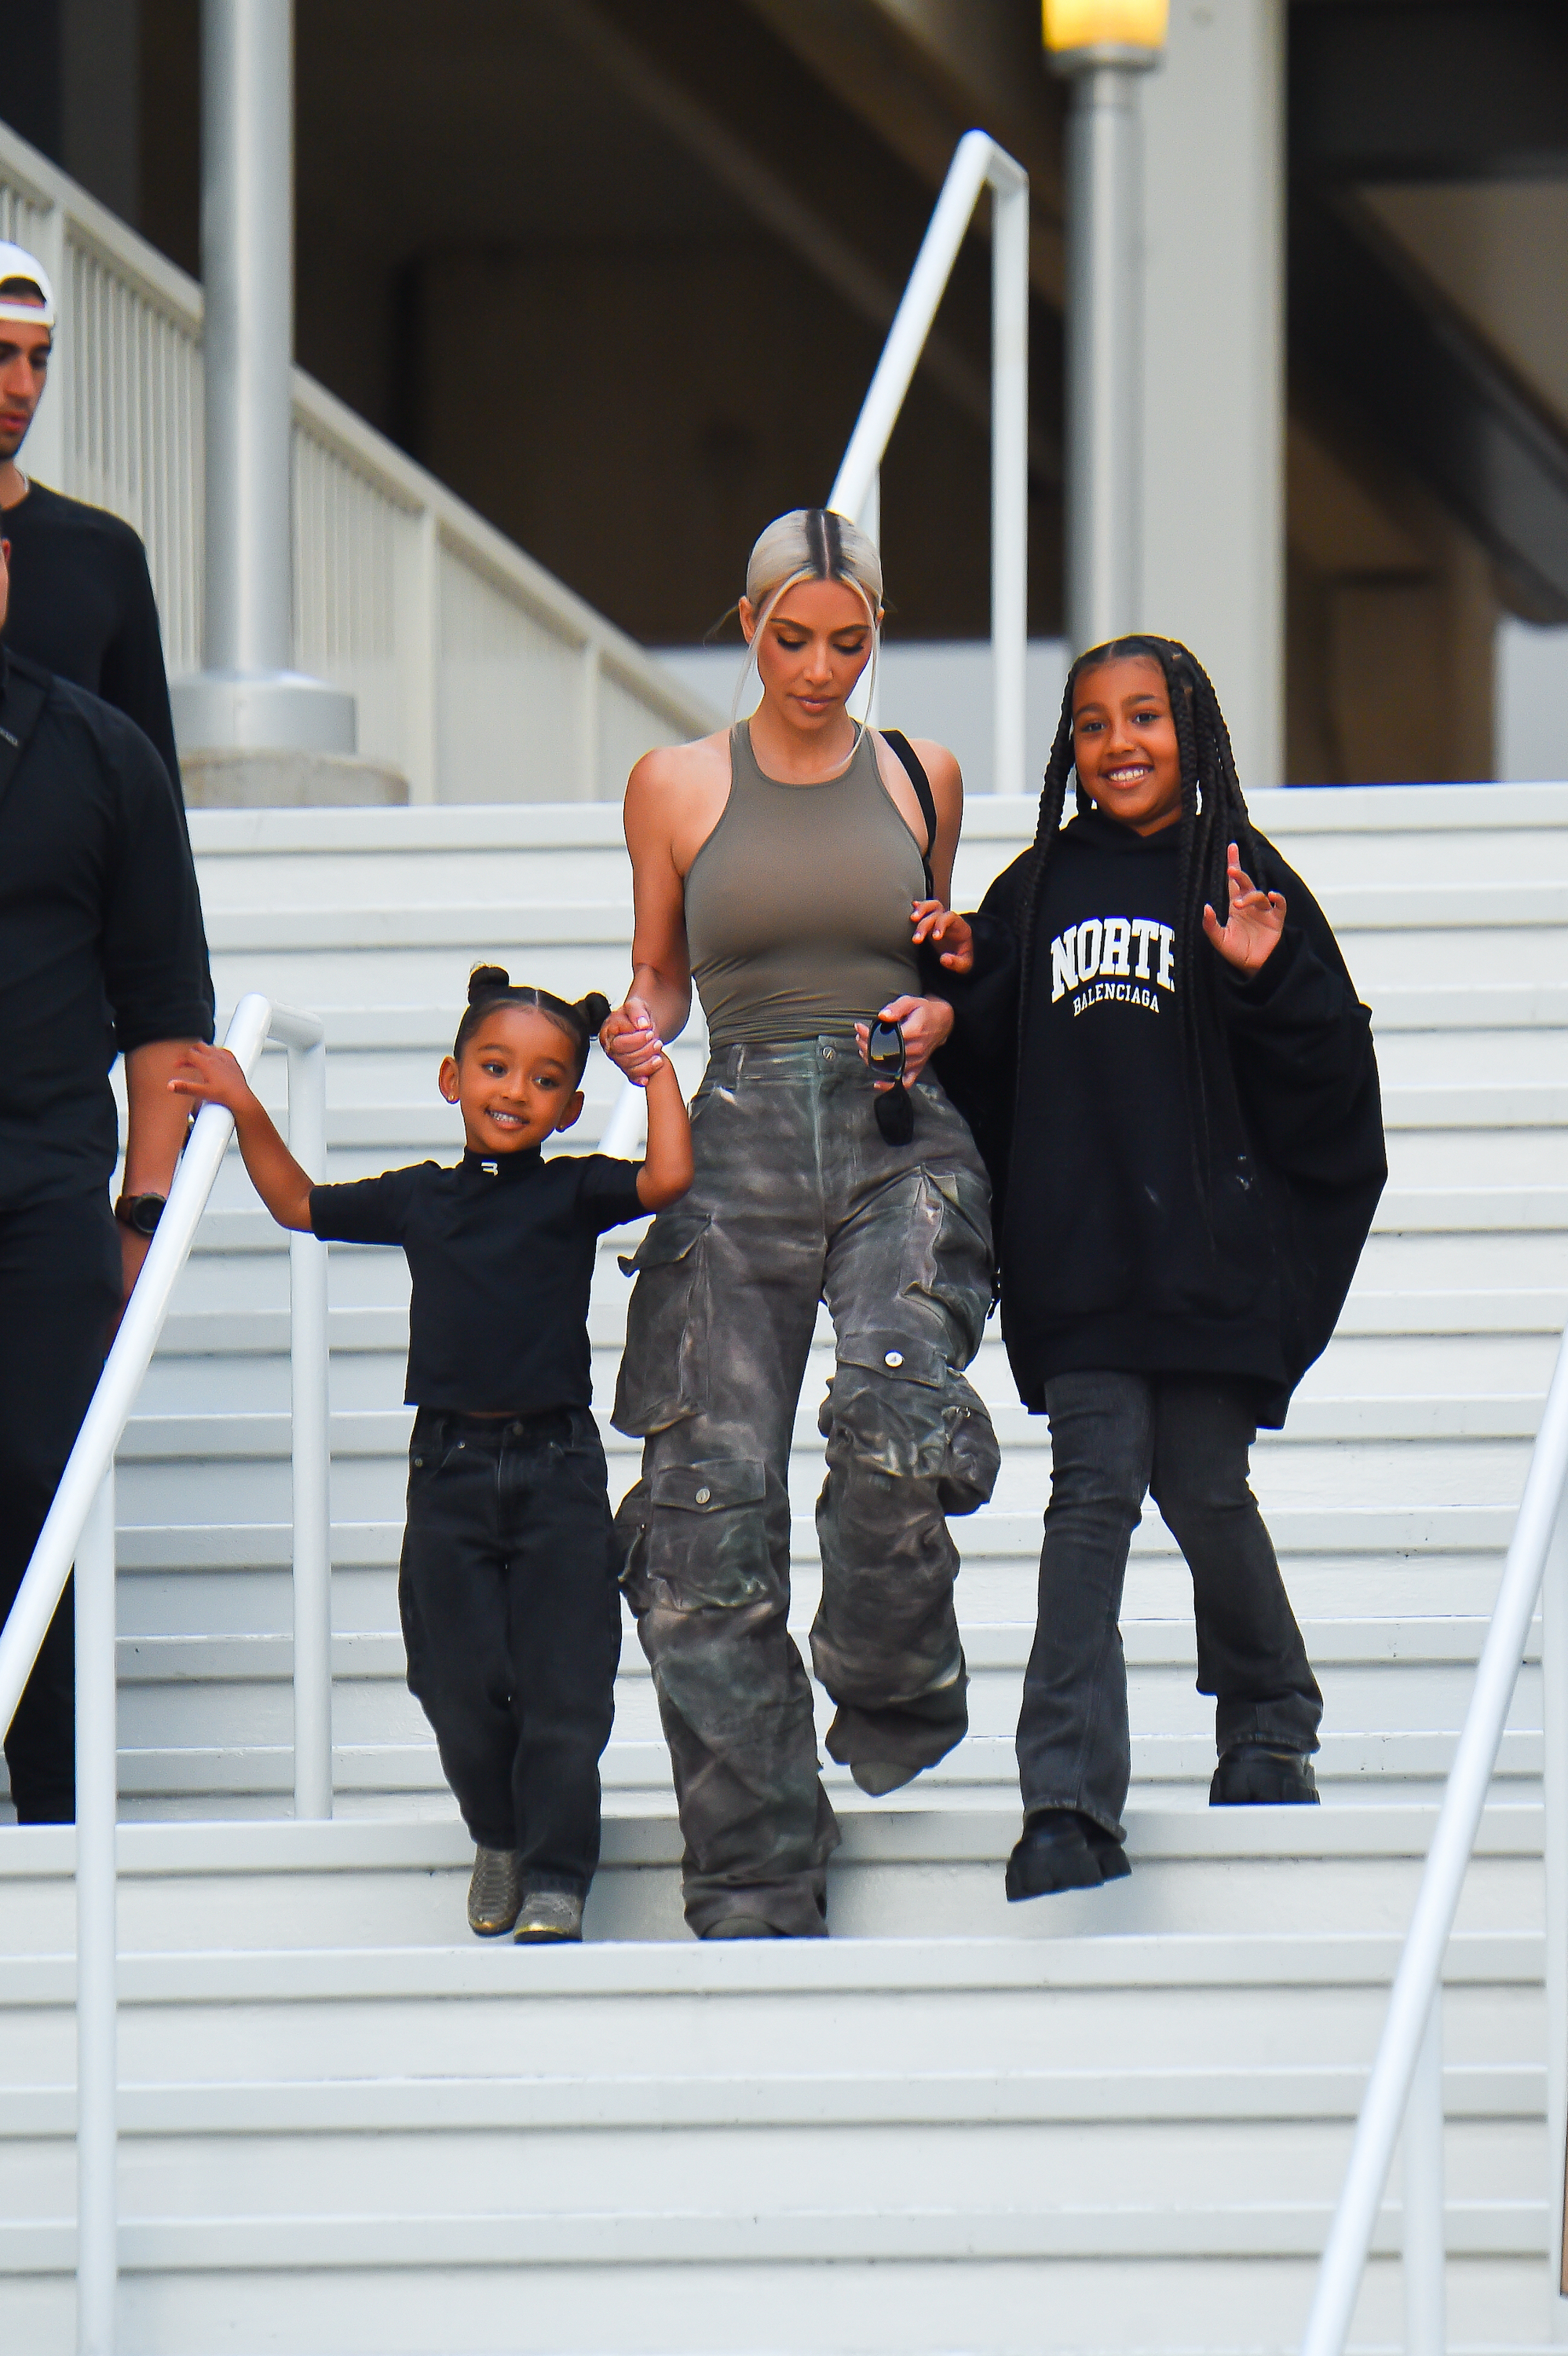 Kim Kardashian pictured with her kids North and Chicago West at an event in July 2022